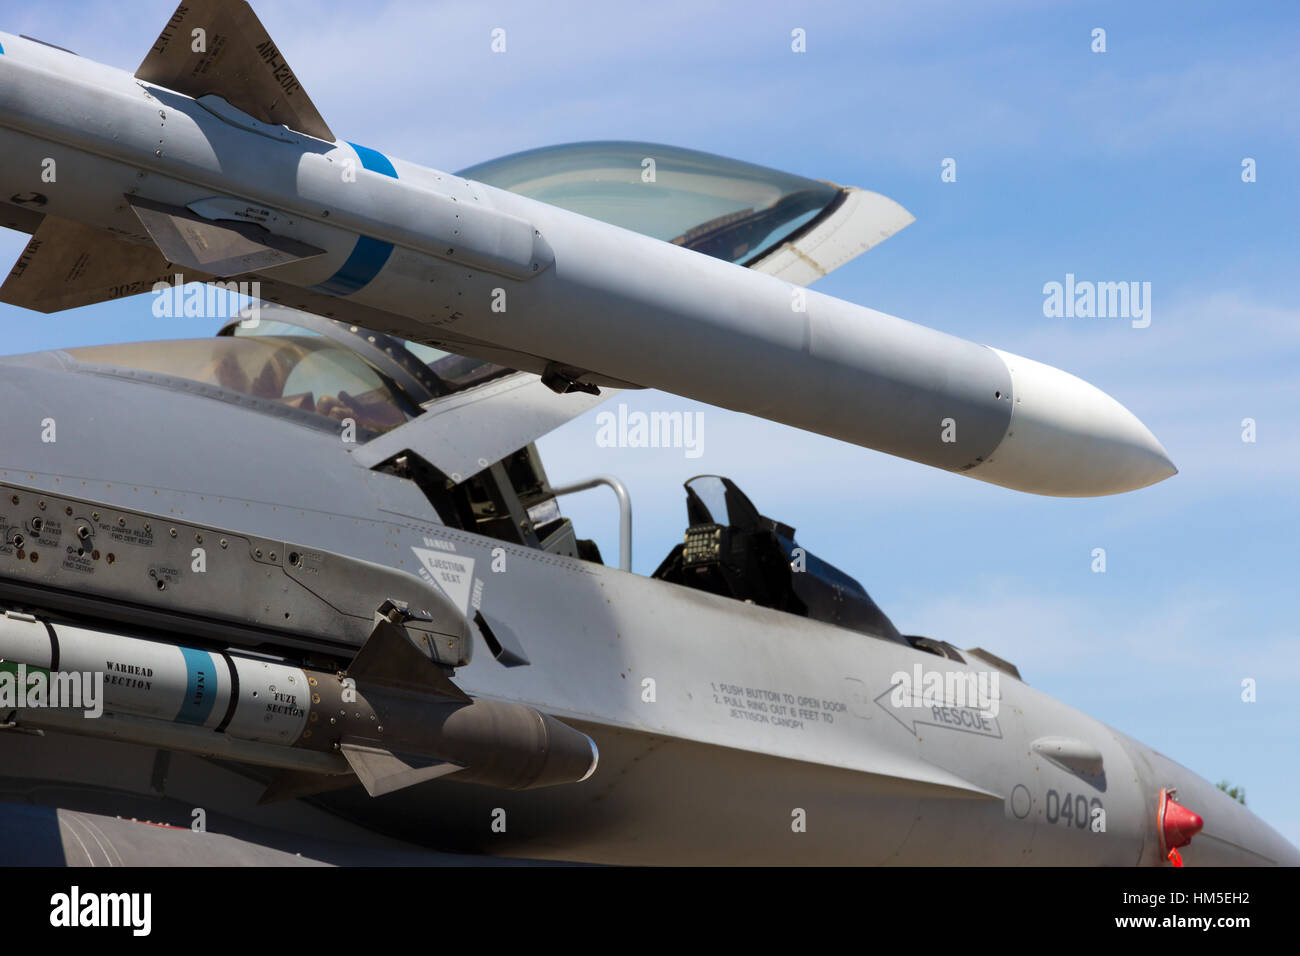 BERLIN, GERMANY - MAY 21: Missiles on an US Air Force F-16 fighter jet at the International Aerospace Exhibition ILA on May 21st, 2014 in Berlin, Germ Stock Photo